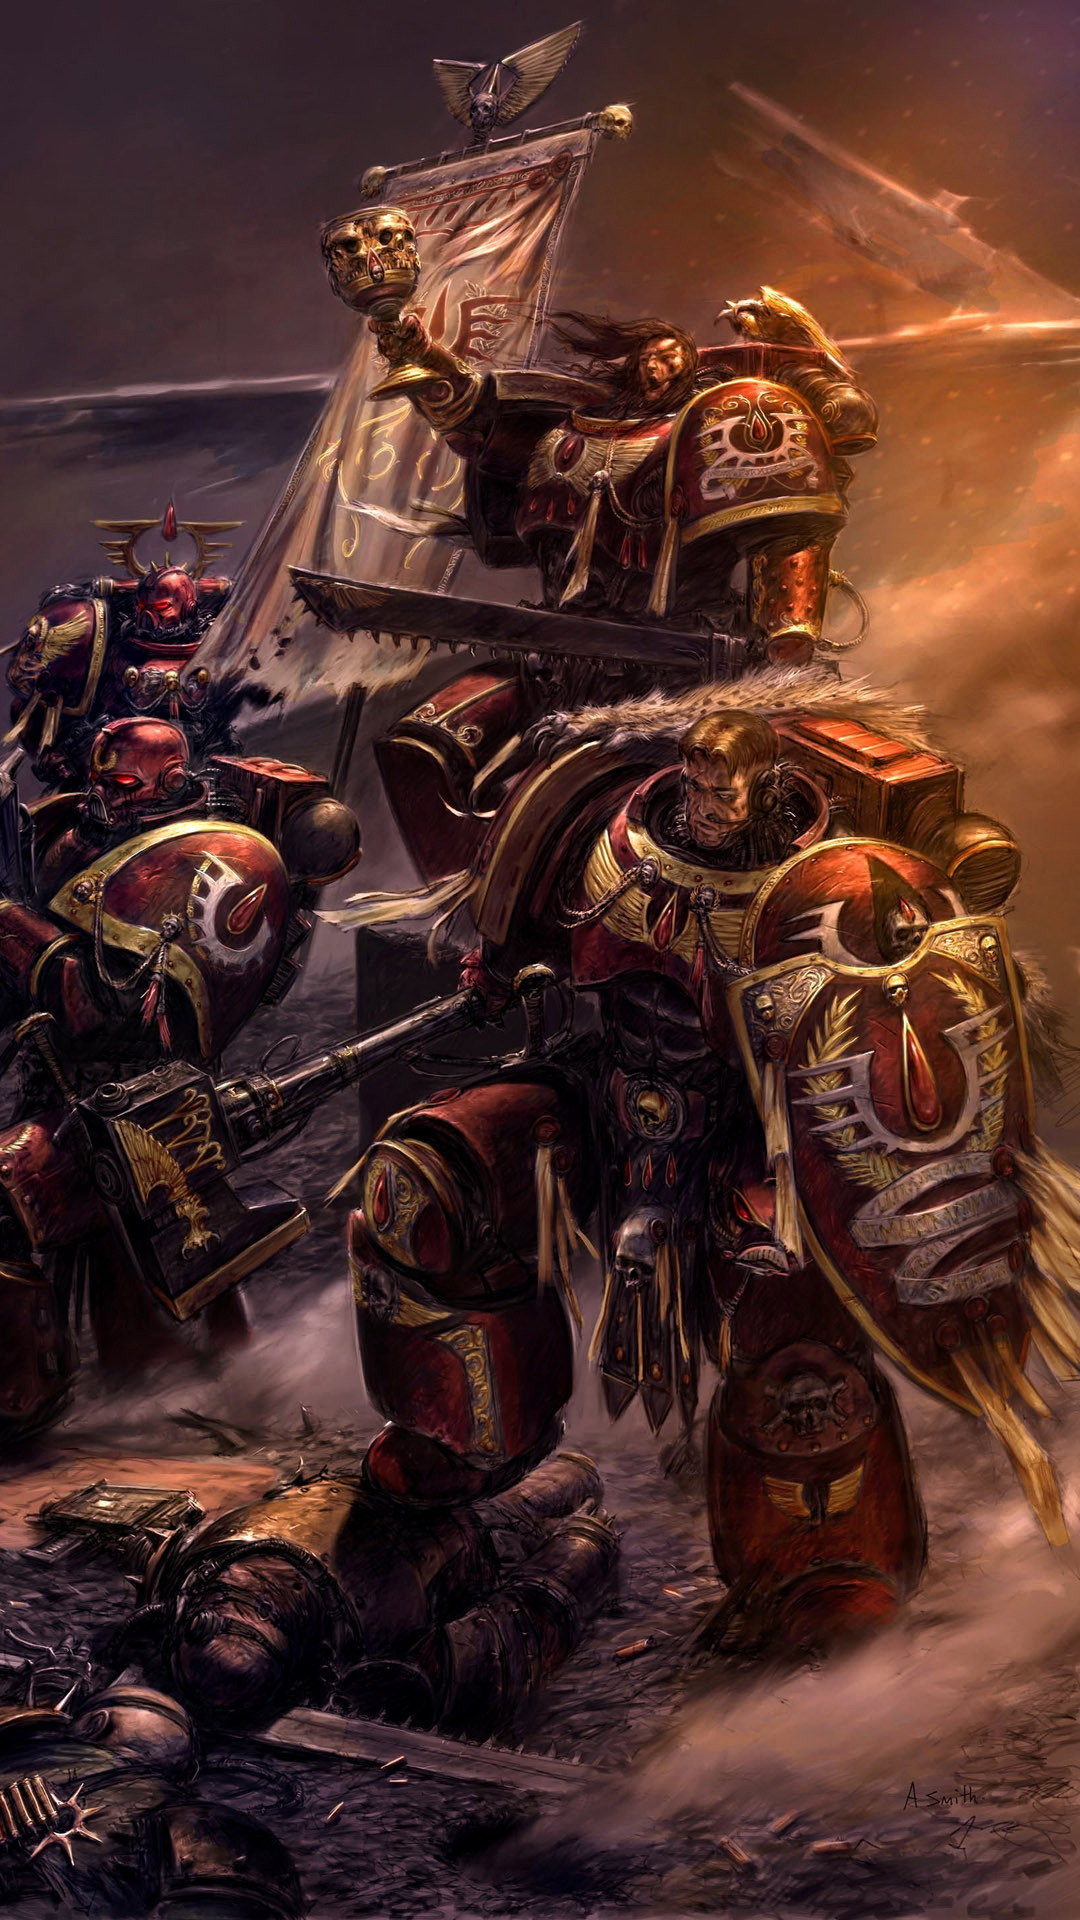 blood angels wallpaper, action adventure game, cg artwork, games, warlord, fictional character